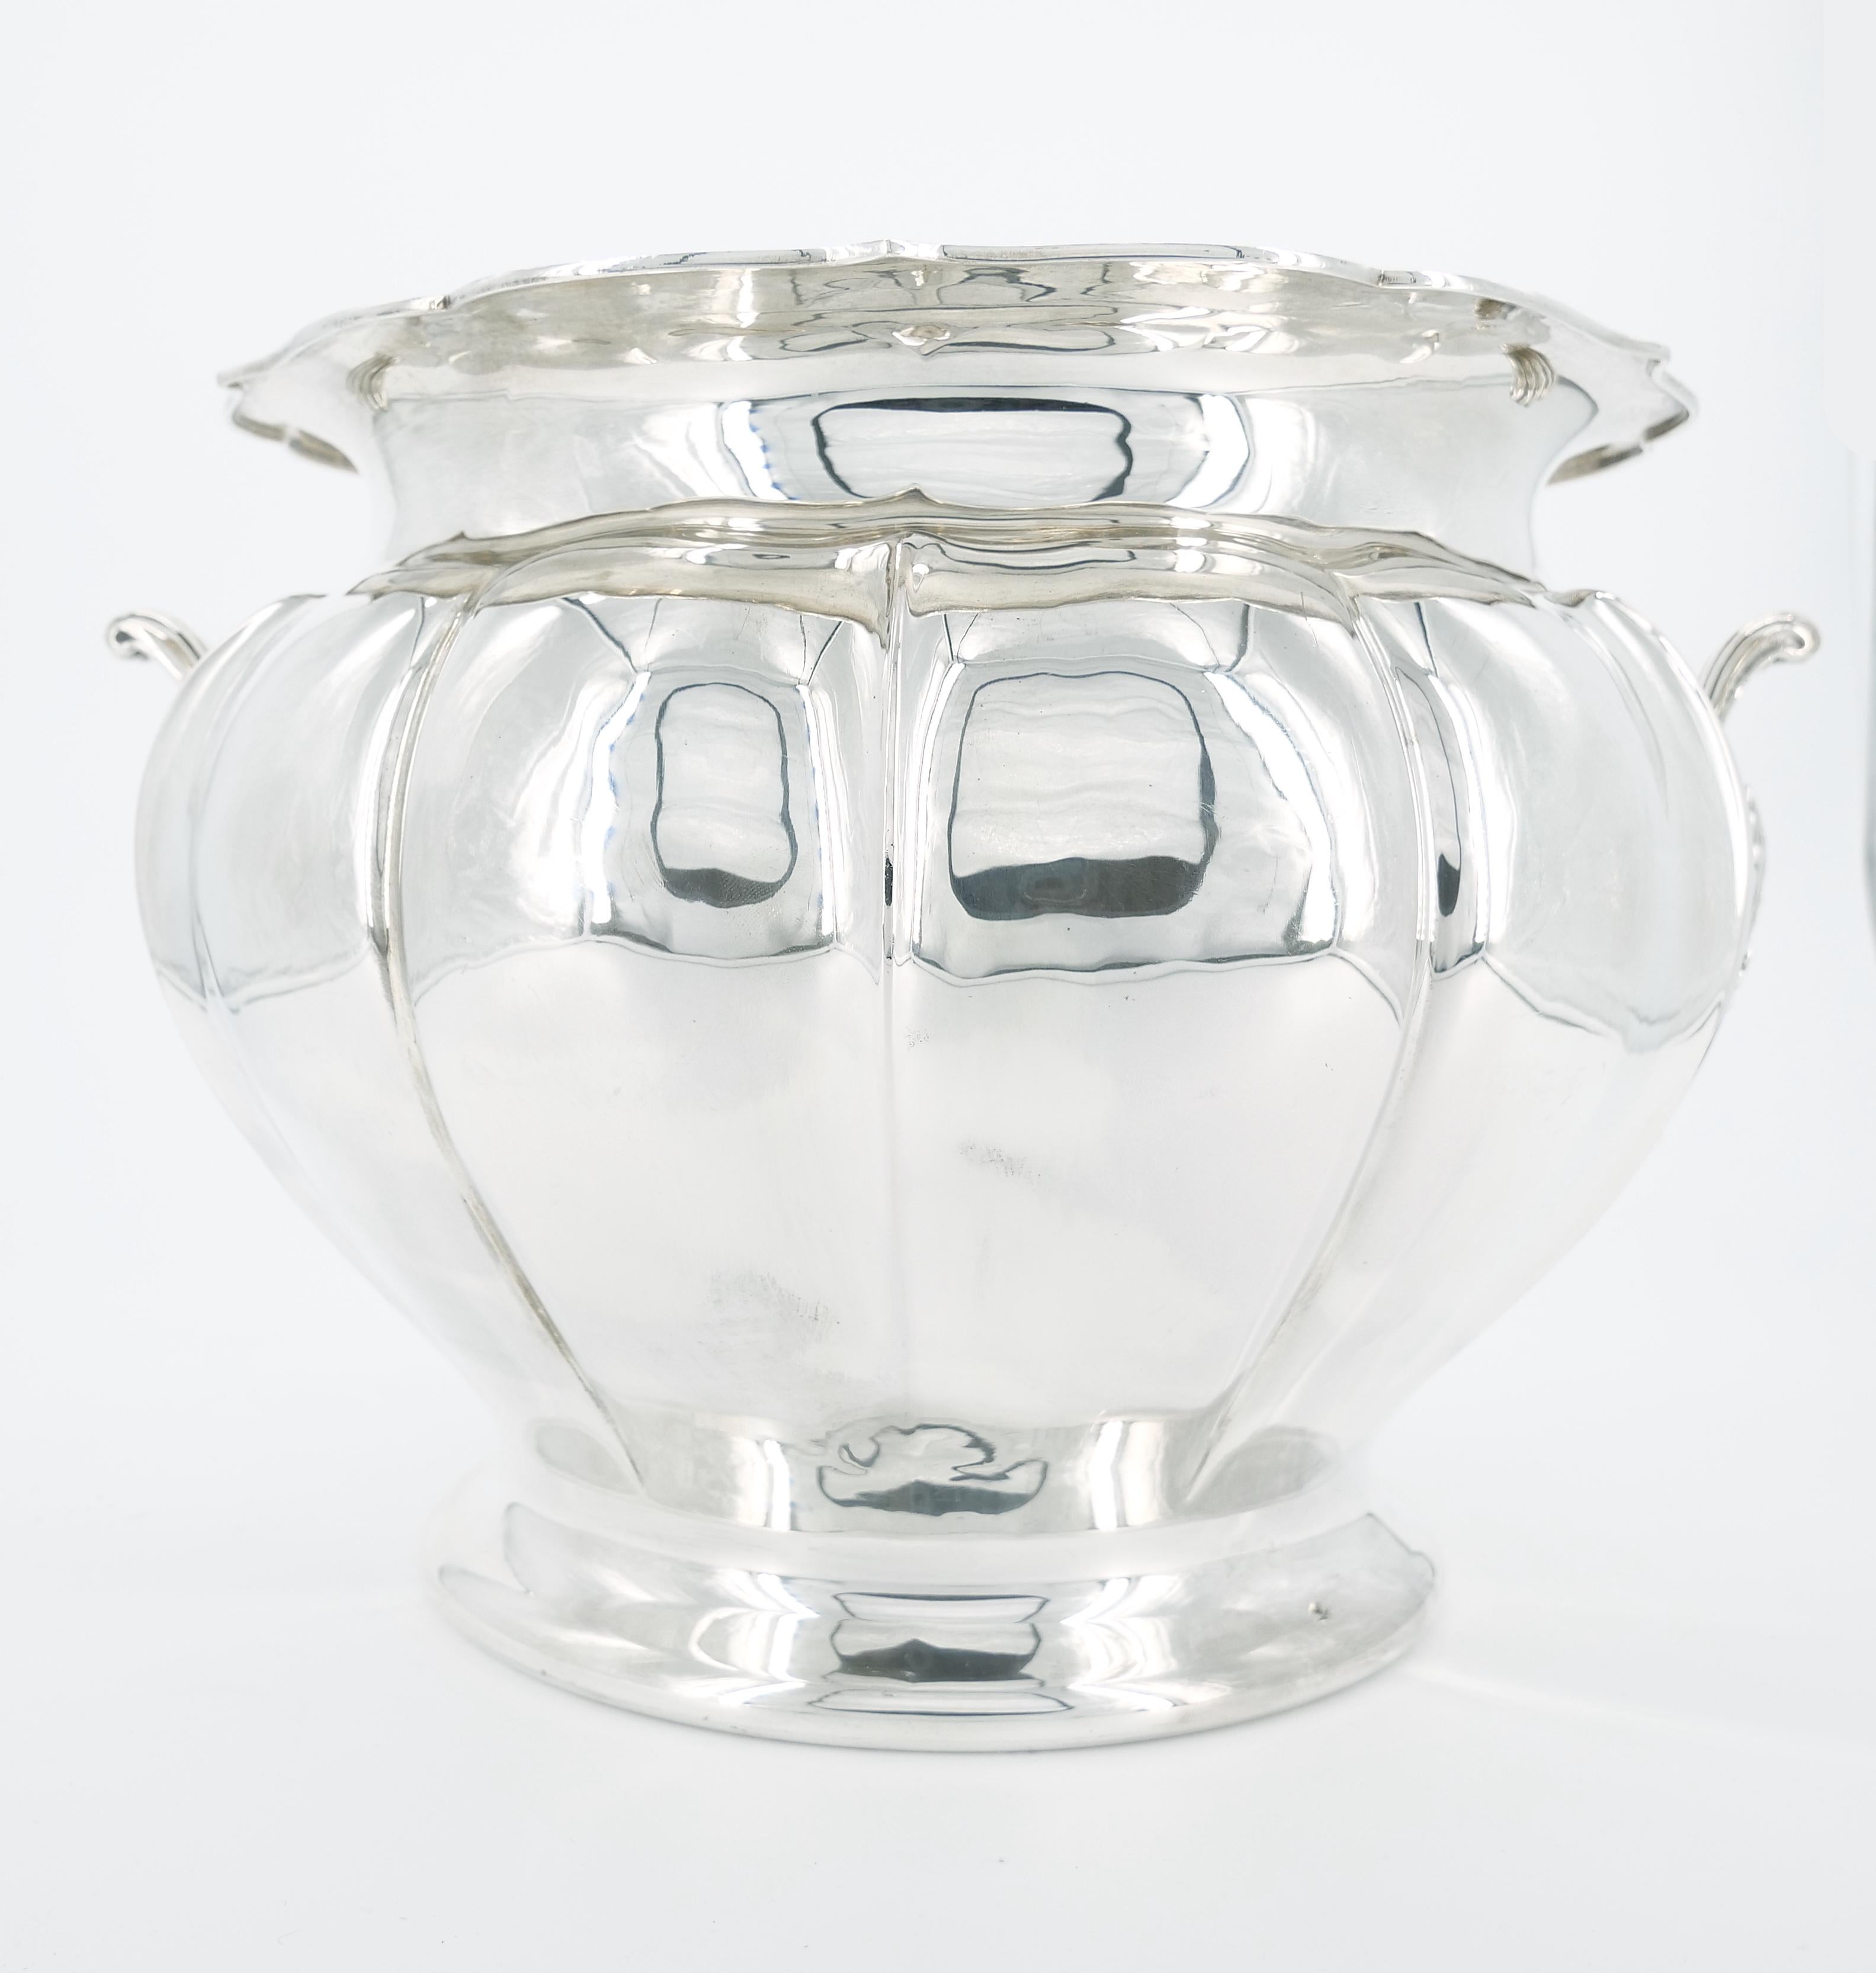 Behold an extraordinary find from the early 19th century – an Italian Sterling Silver and Gold Wash Interior Champagne Cooler, a masterpiece of both function and aesthetic appeal. This exquisite wine cooler or ice bucket showcases a refined exterior